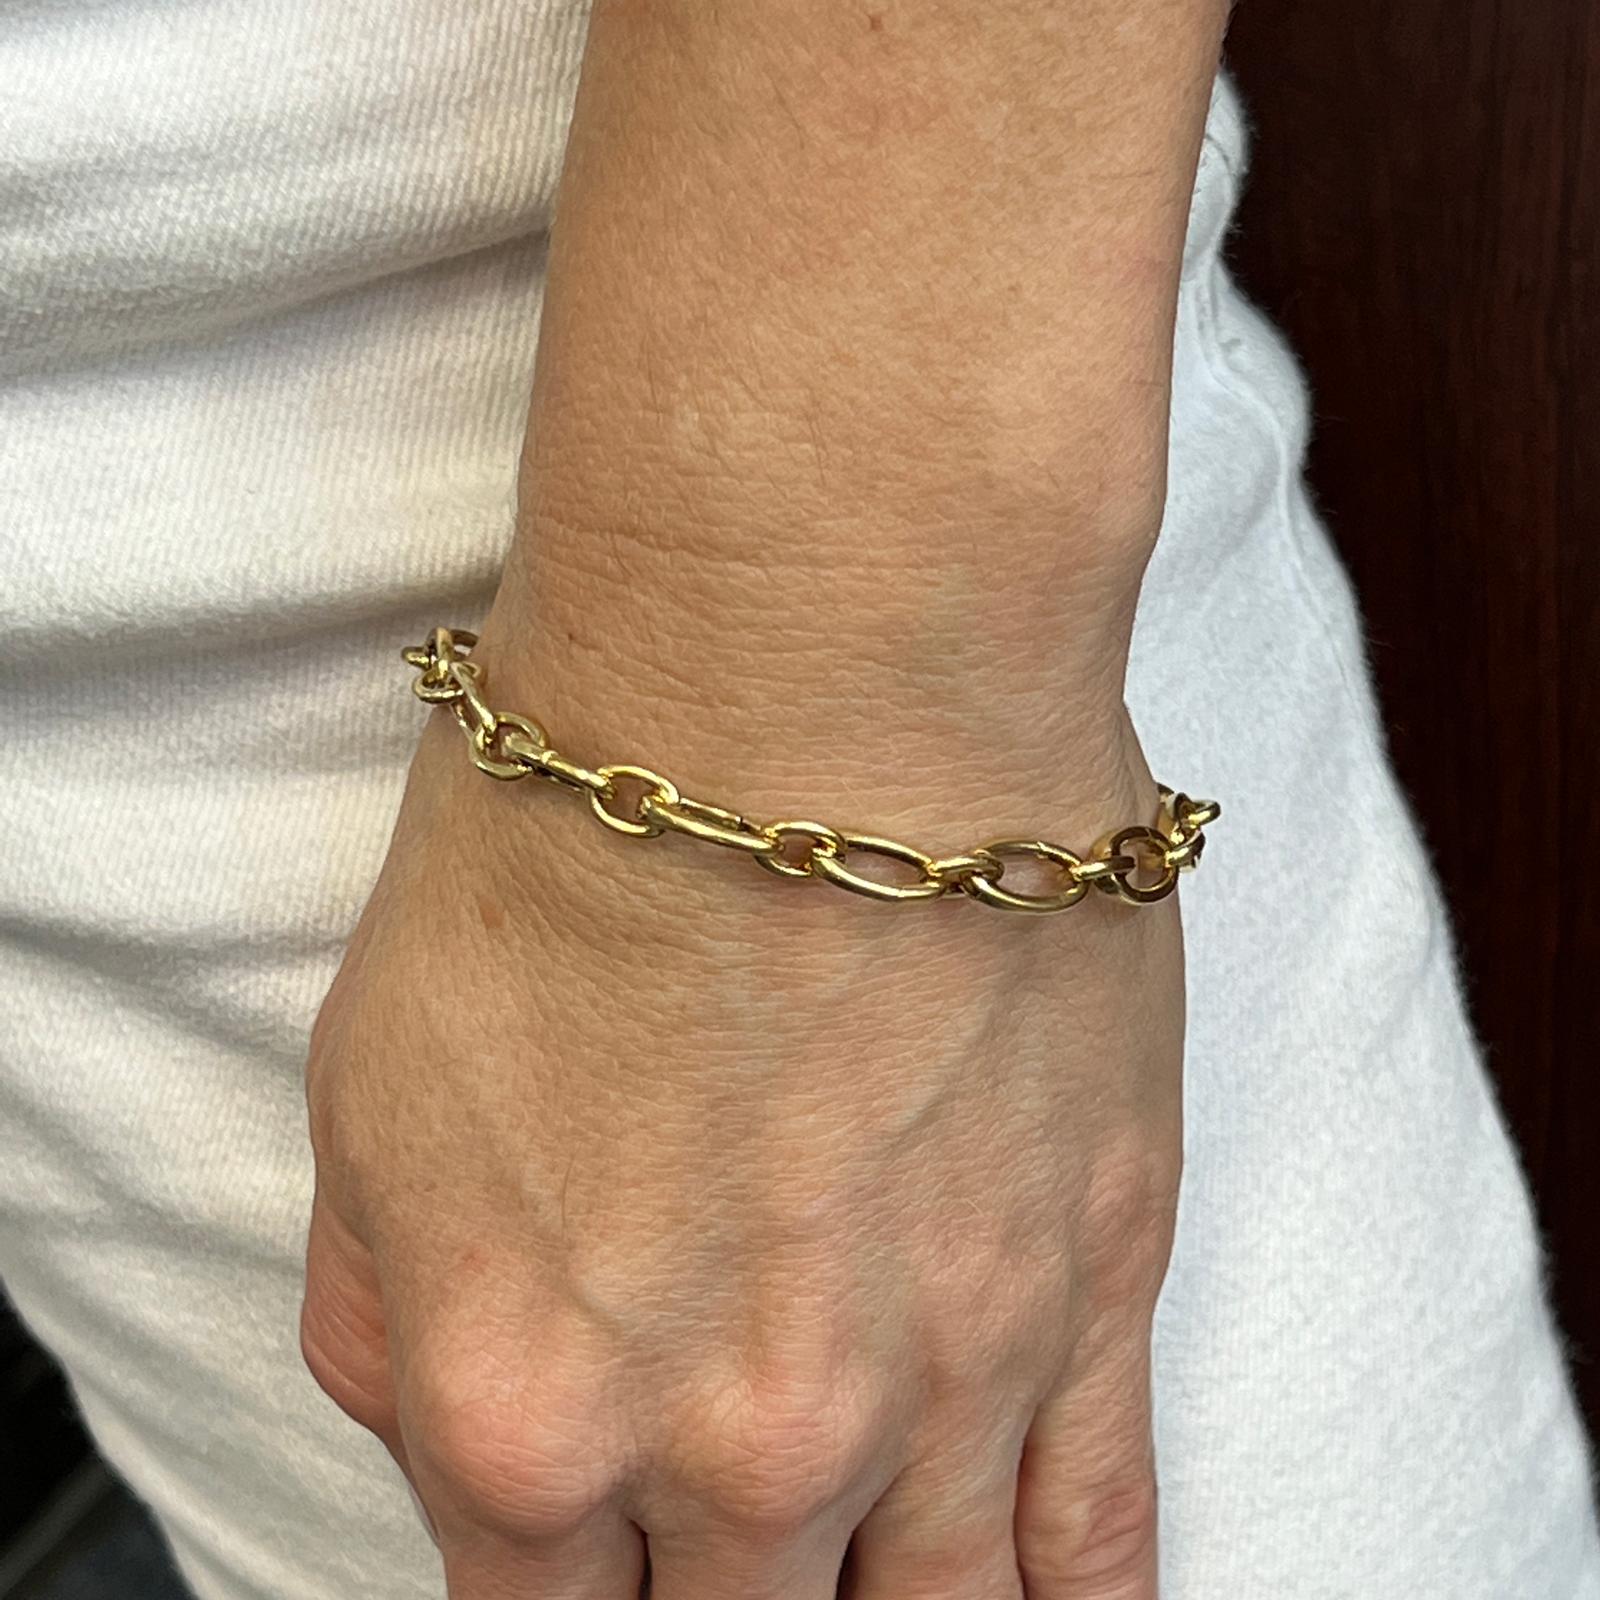 Modern Tiffany & Co. oval link bracelet crafted in 18 karat yellow gold. The oval solid links feature hidden clasps, measure approximately 7mm in width, the bracelet measures 7.5 inches in length. Signed T&Co. 750 Italy. 
MSRP: $3,300.00